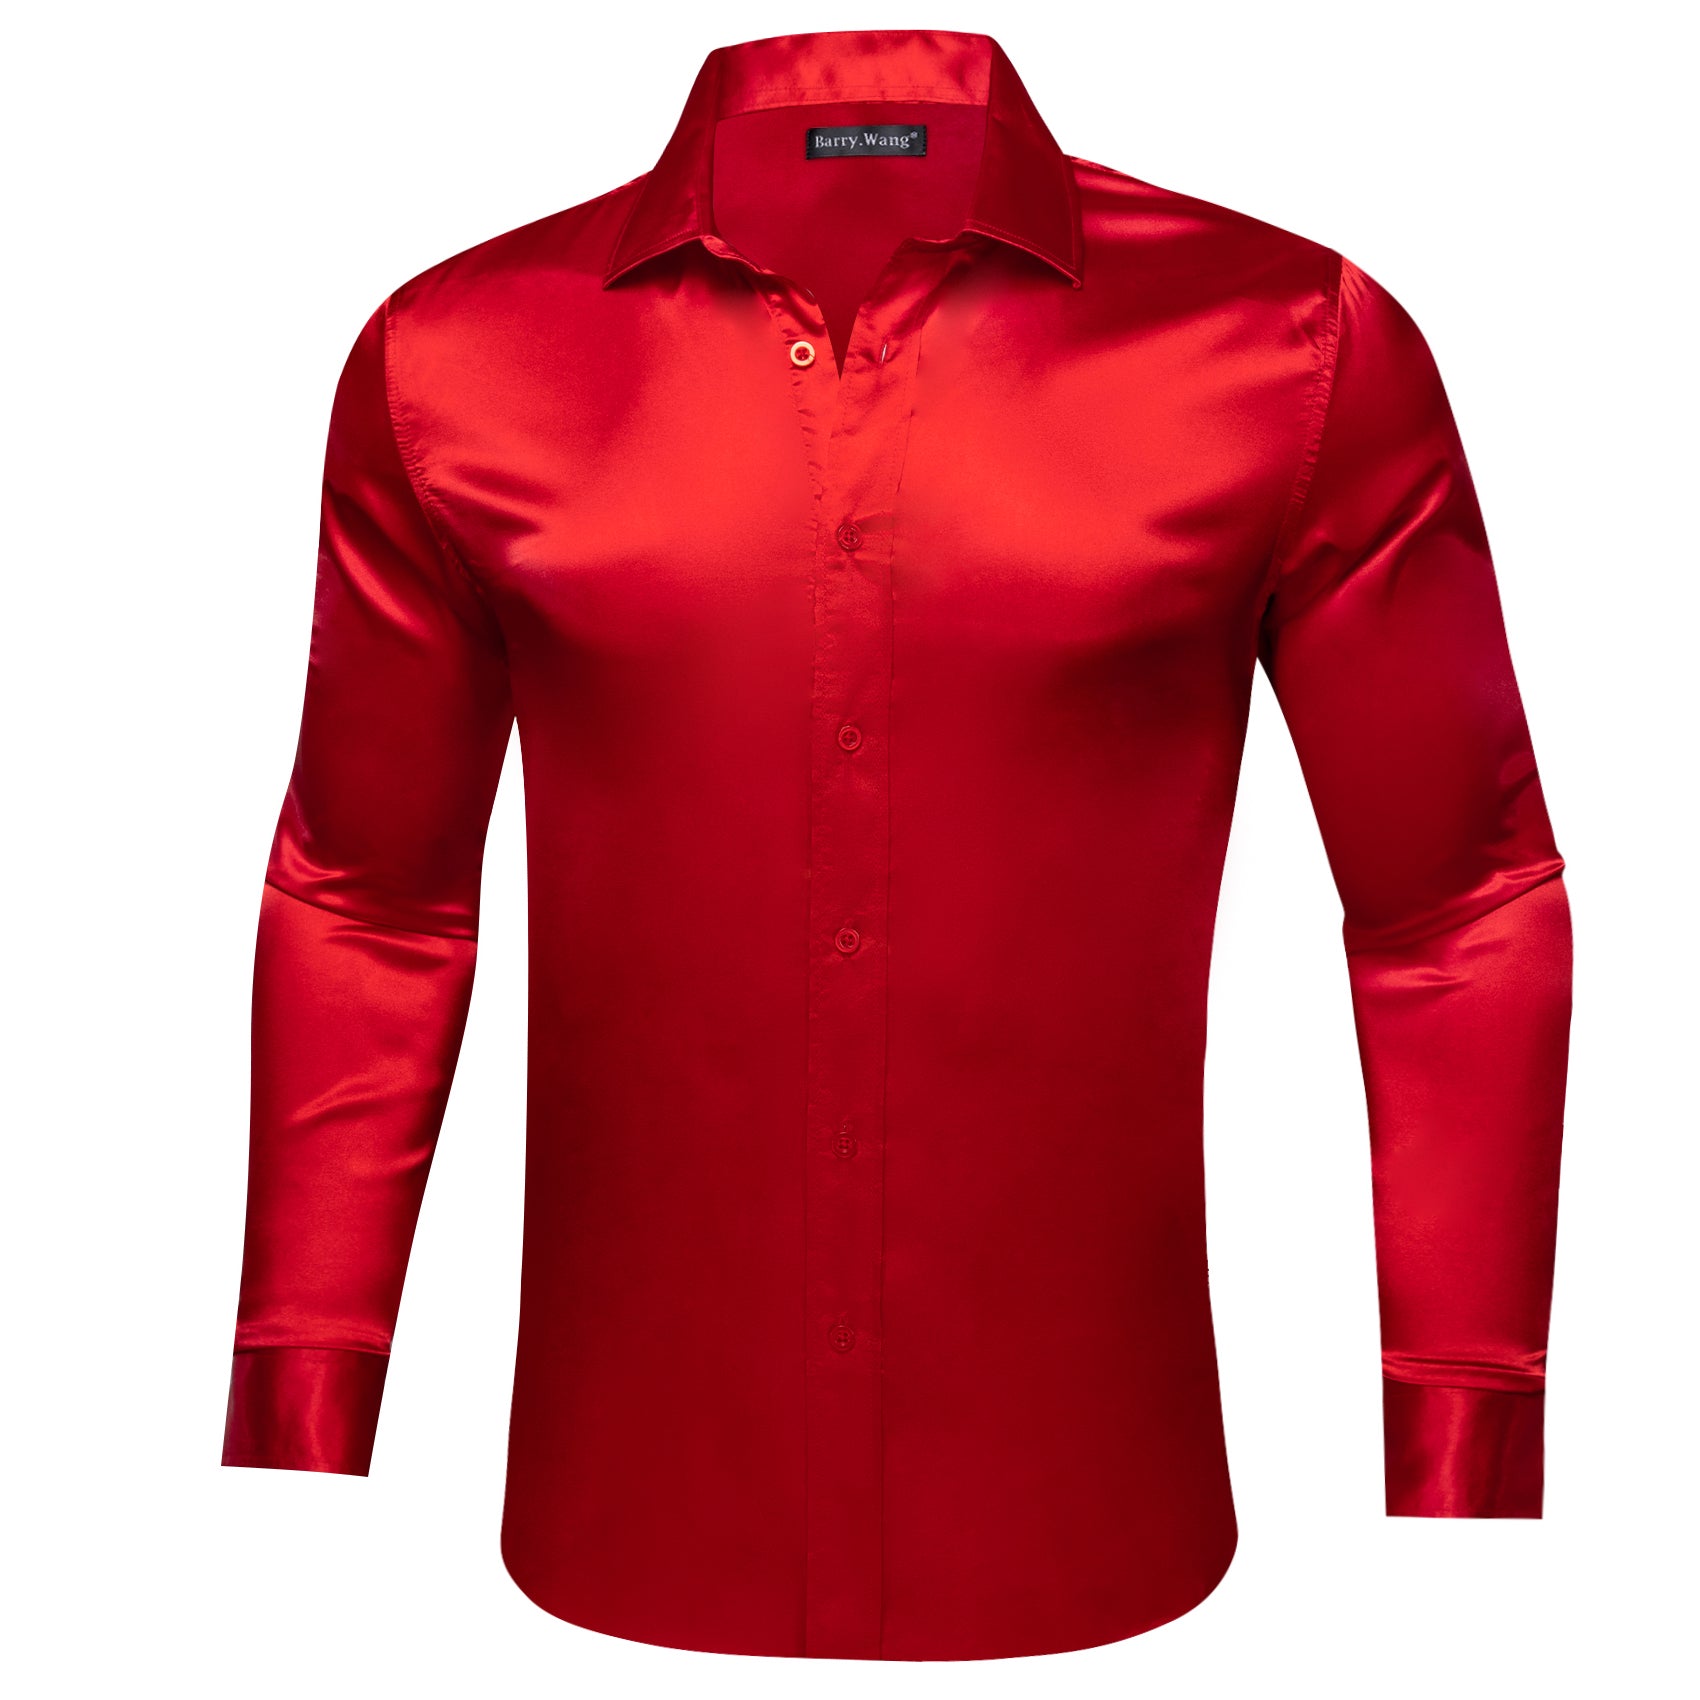 Barry.wang Strong Red Solid Silk Shirt